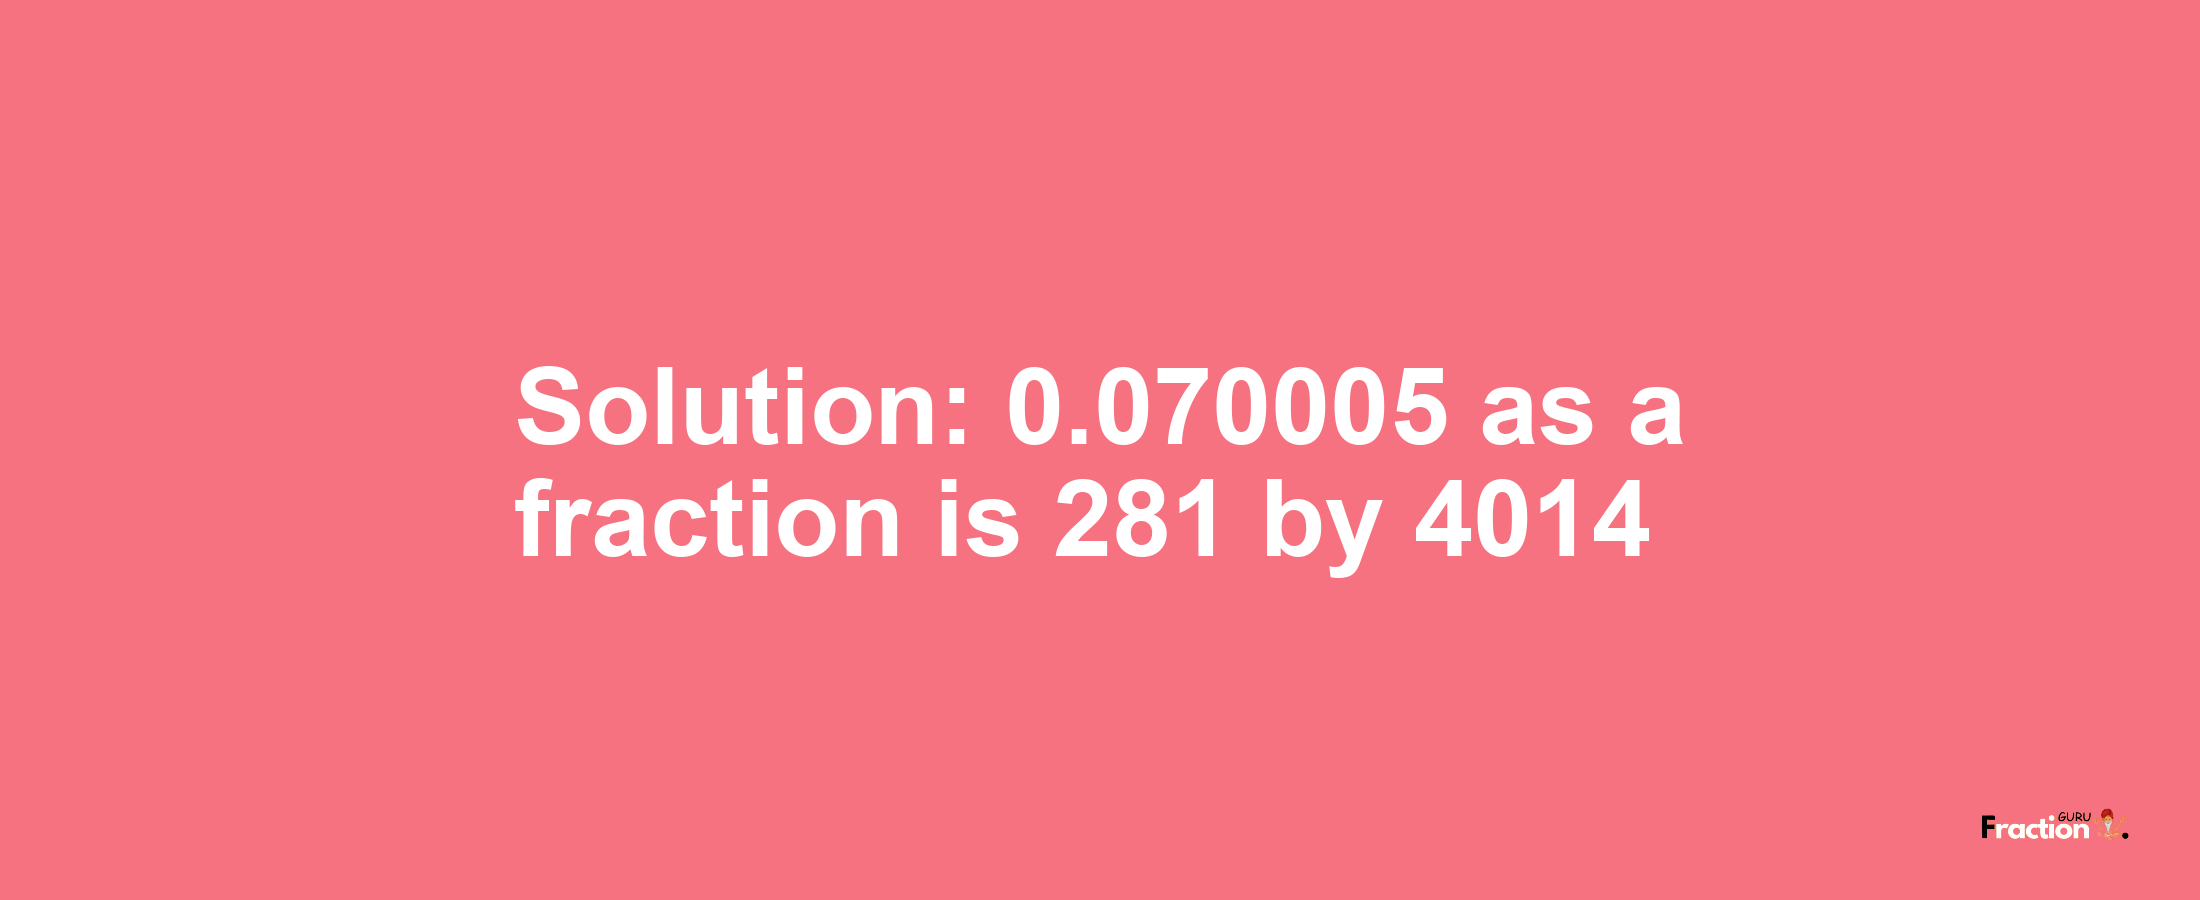 Solution:0.070005 as a fraction is 281/4014